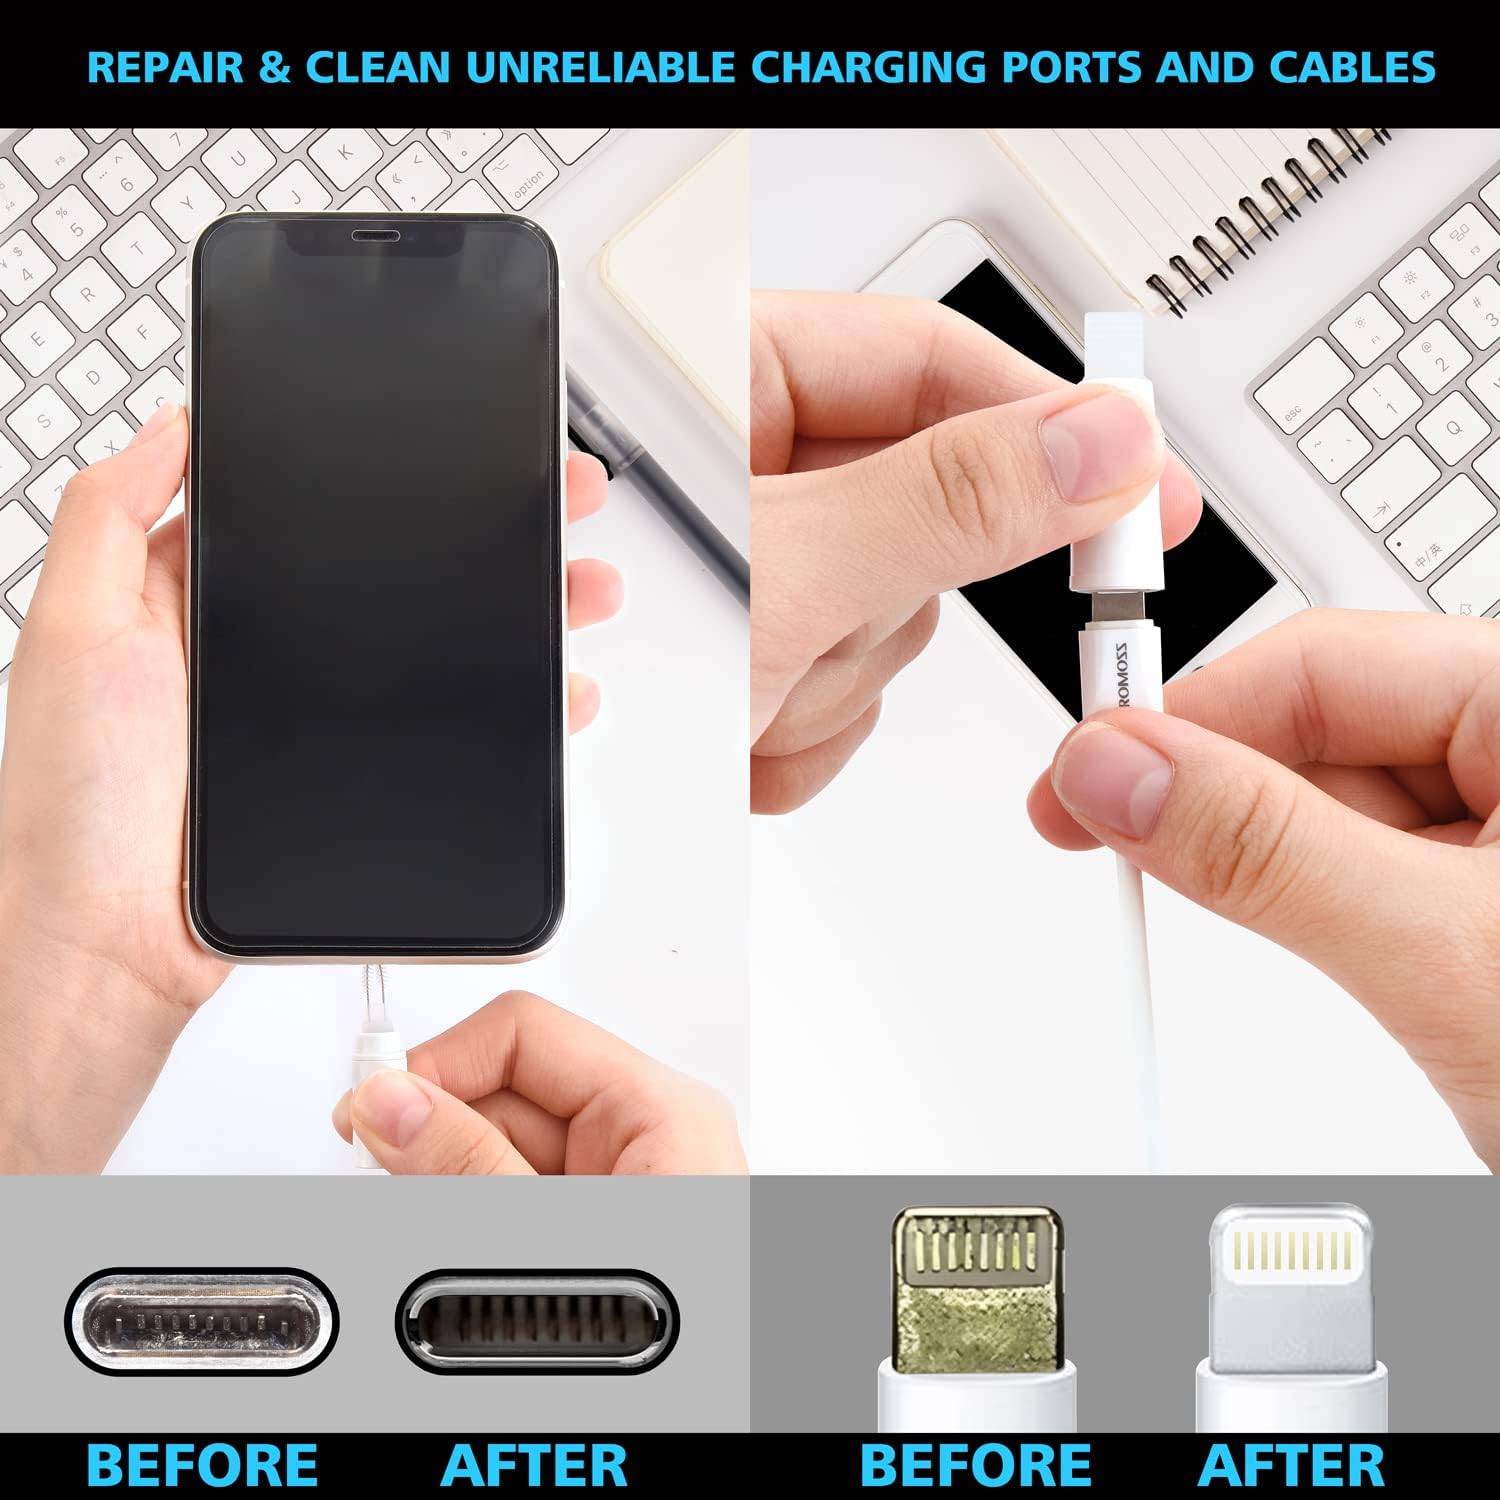 Cleaning Kit for iPhone, Multi-Tool AirPod Cleaner Kit, Cell Phone Cleaning Repair  Recovery iPhone and iPad (Type C) Charging Port, Lightning Cables, and Connectors, Easy to Store and Carry Design